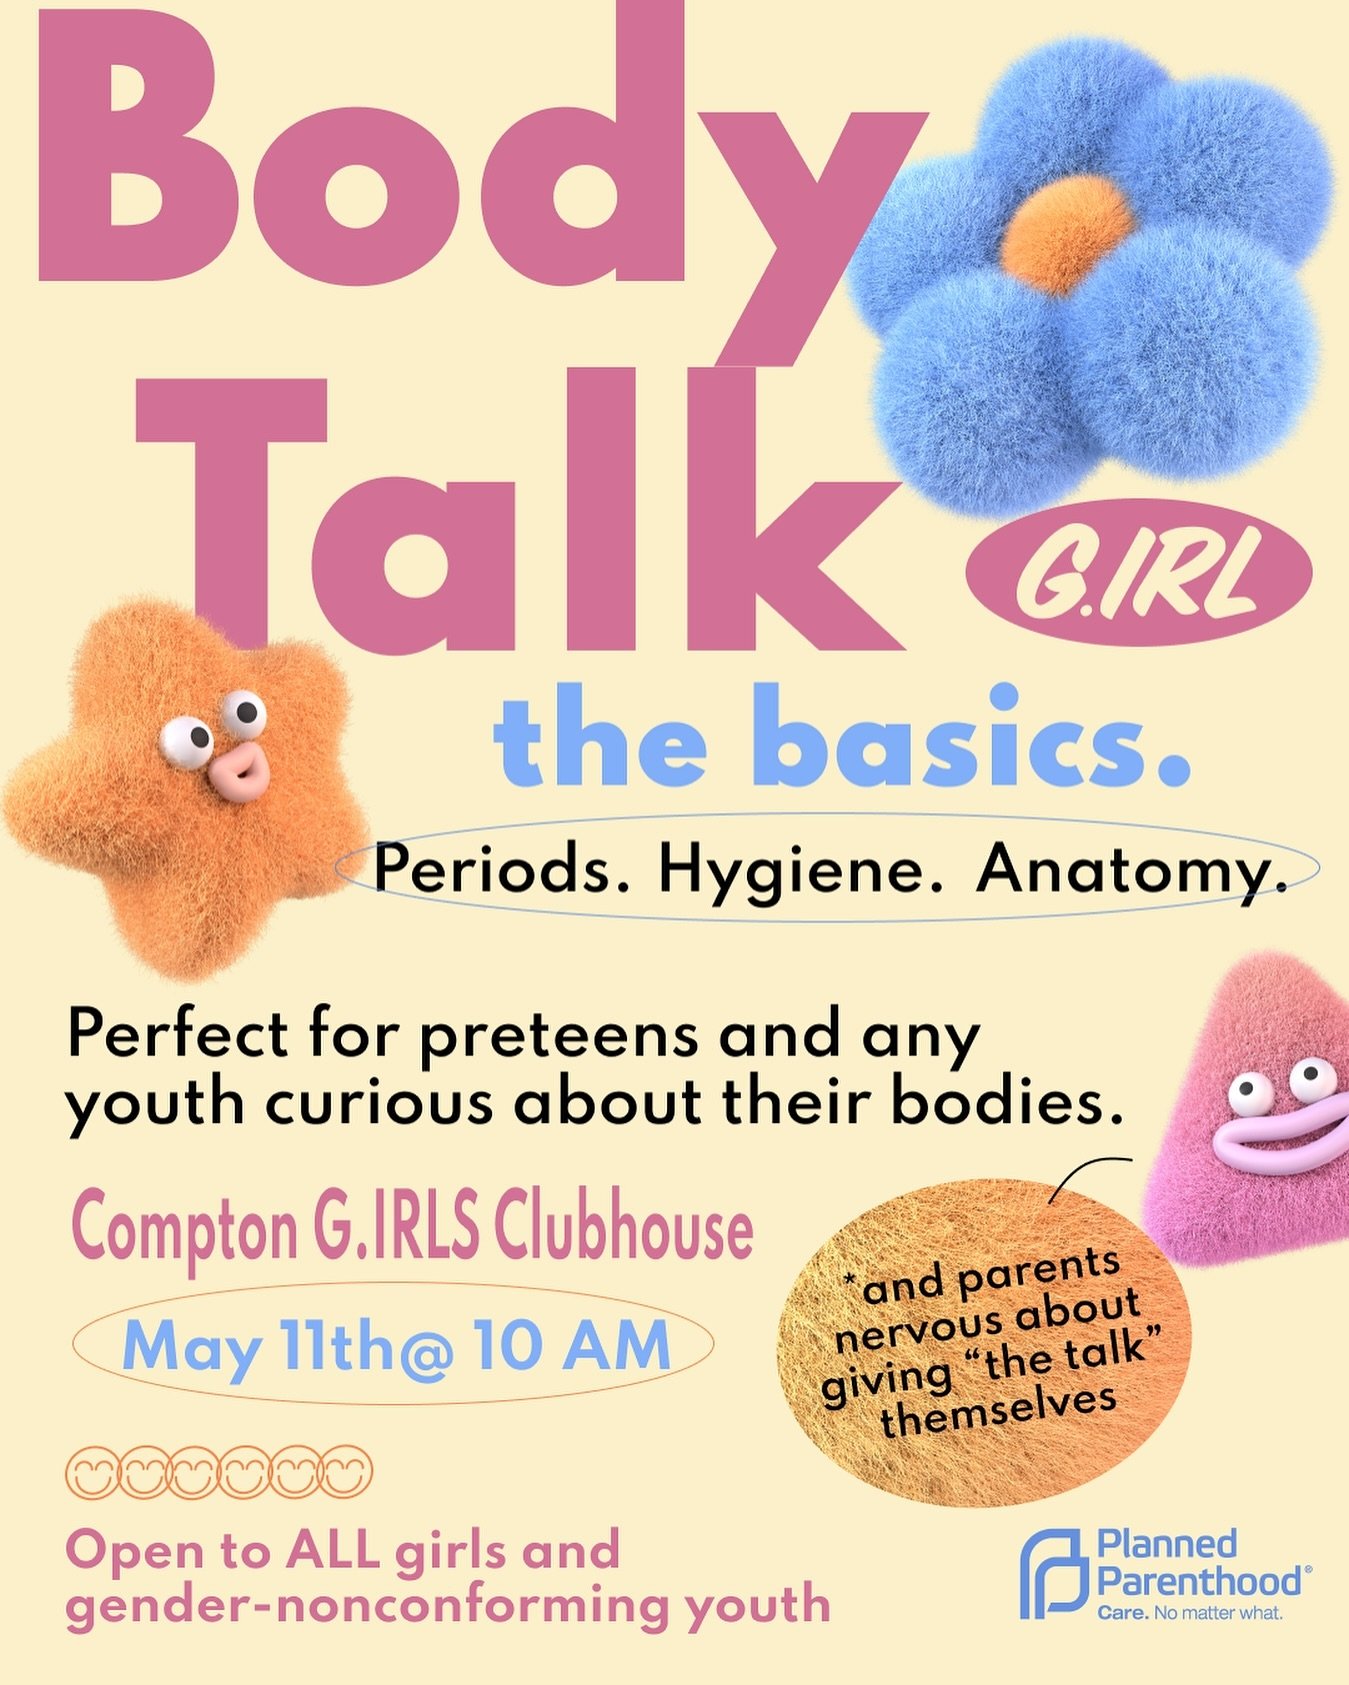 Join us on Saturday, May 11th at @10 am for a body talk conversation led by @plannedparenthood Black Health Initiative.
&zwnj;
Parents! This is perfect for those nervous about teaching their children about their changing bodies. Dads, Moms, and caret